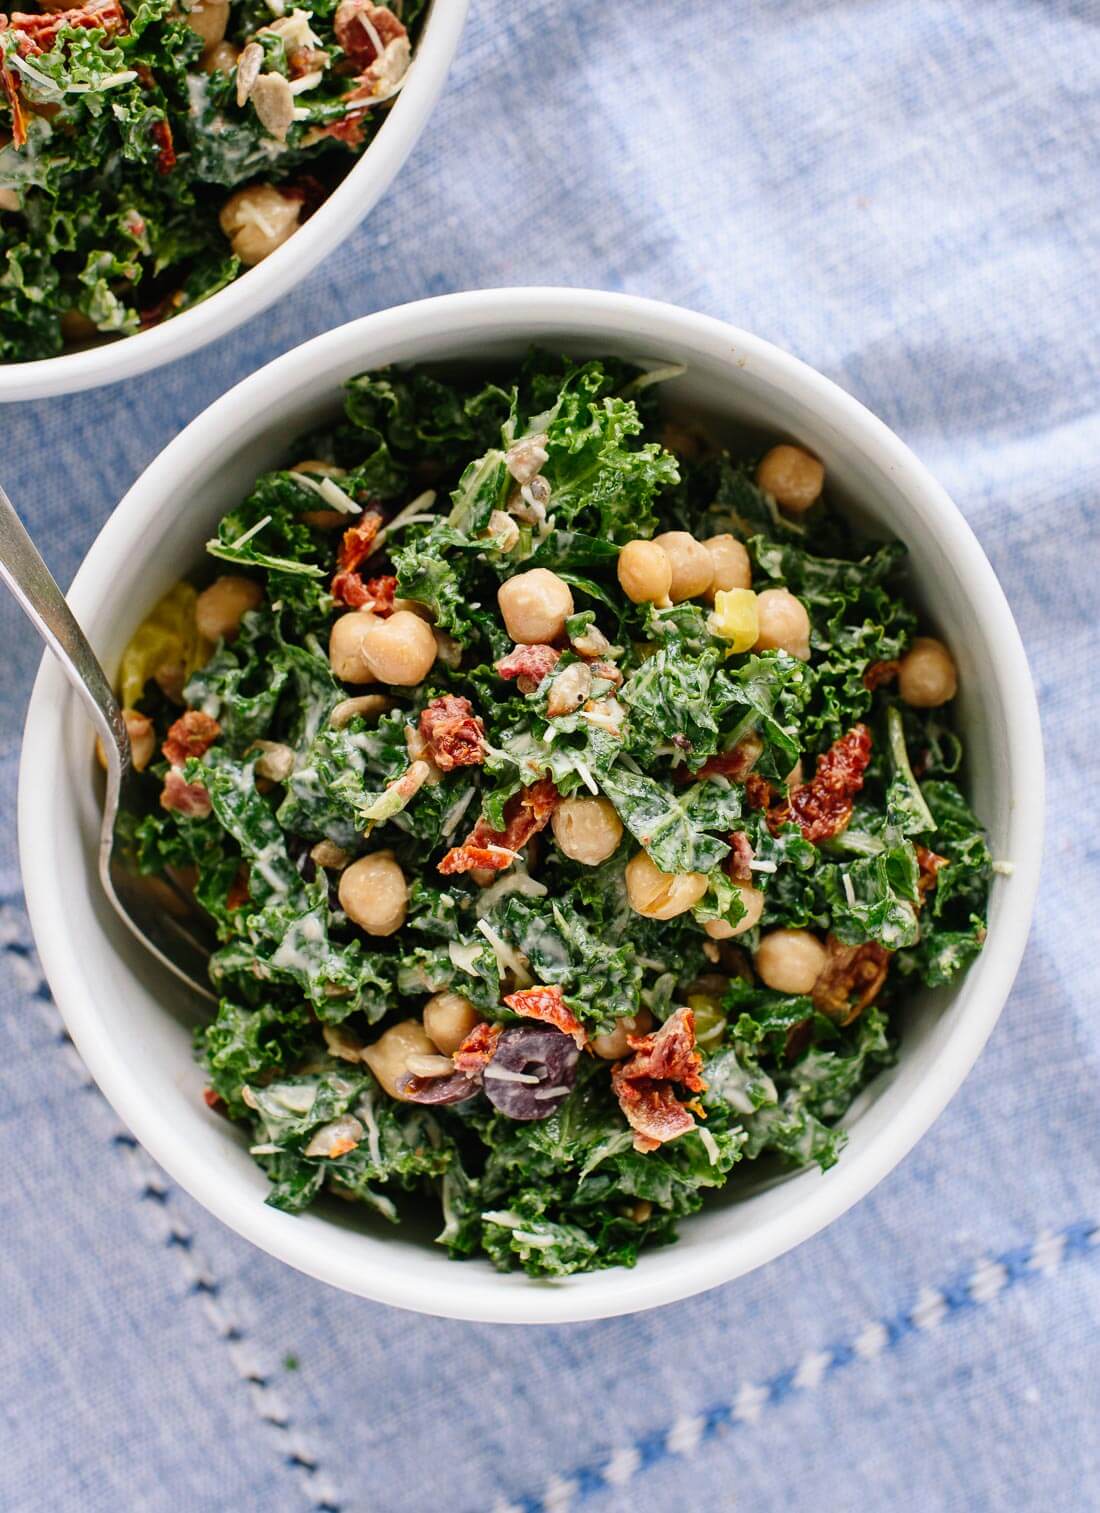 How do you use fresh kale in a salad recipe?